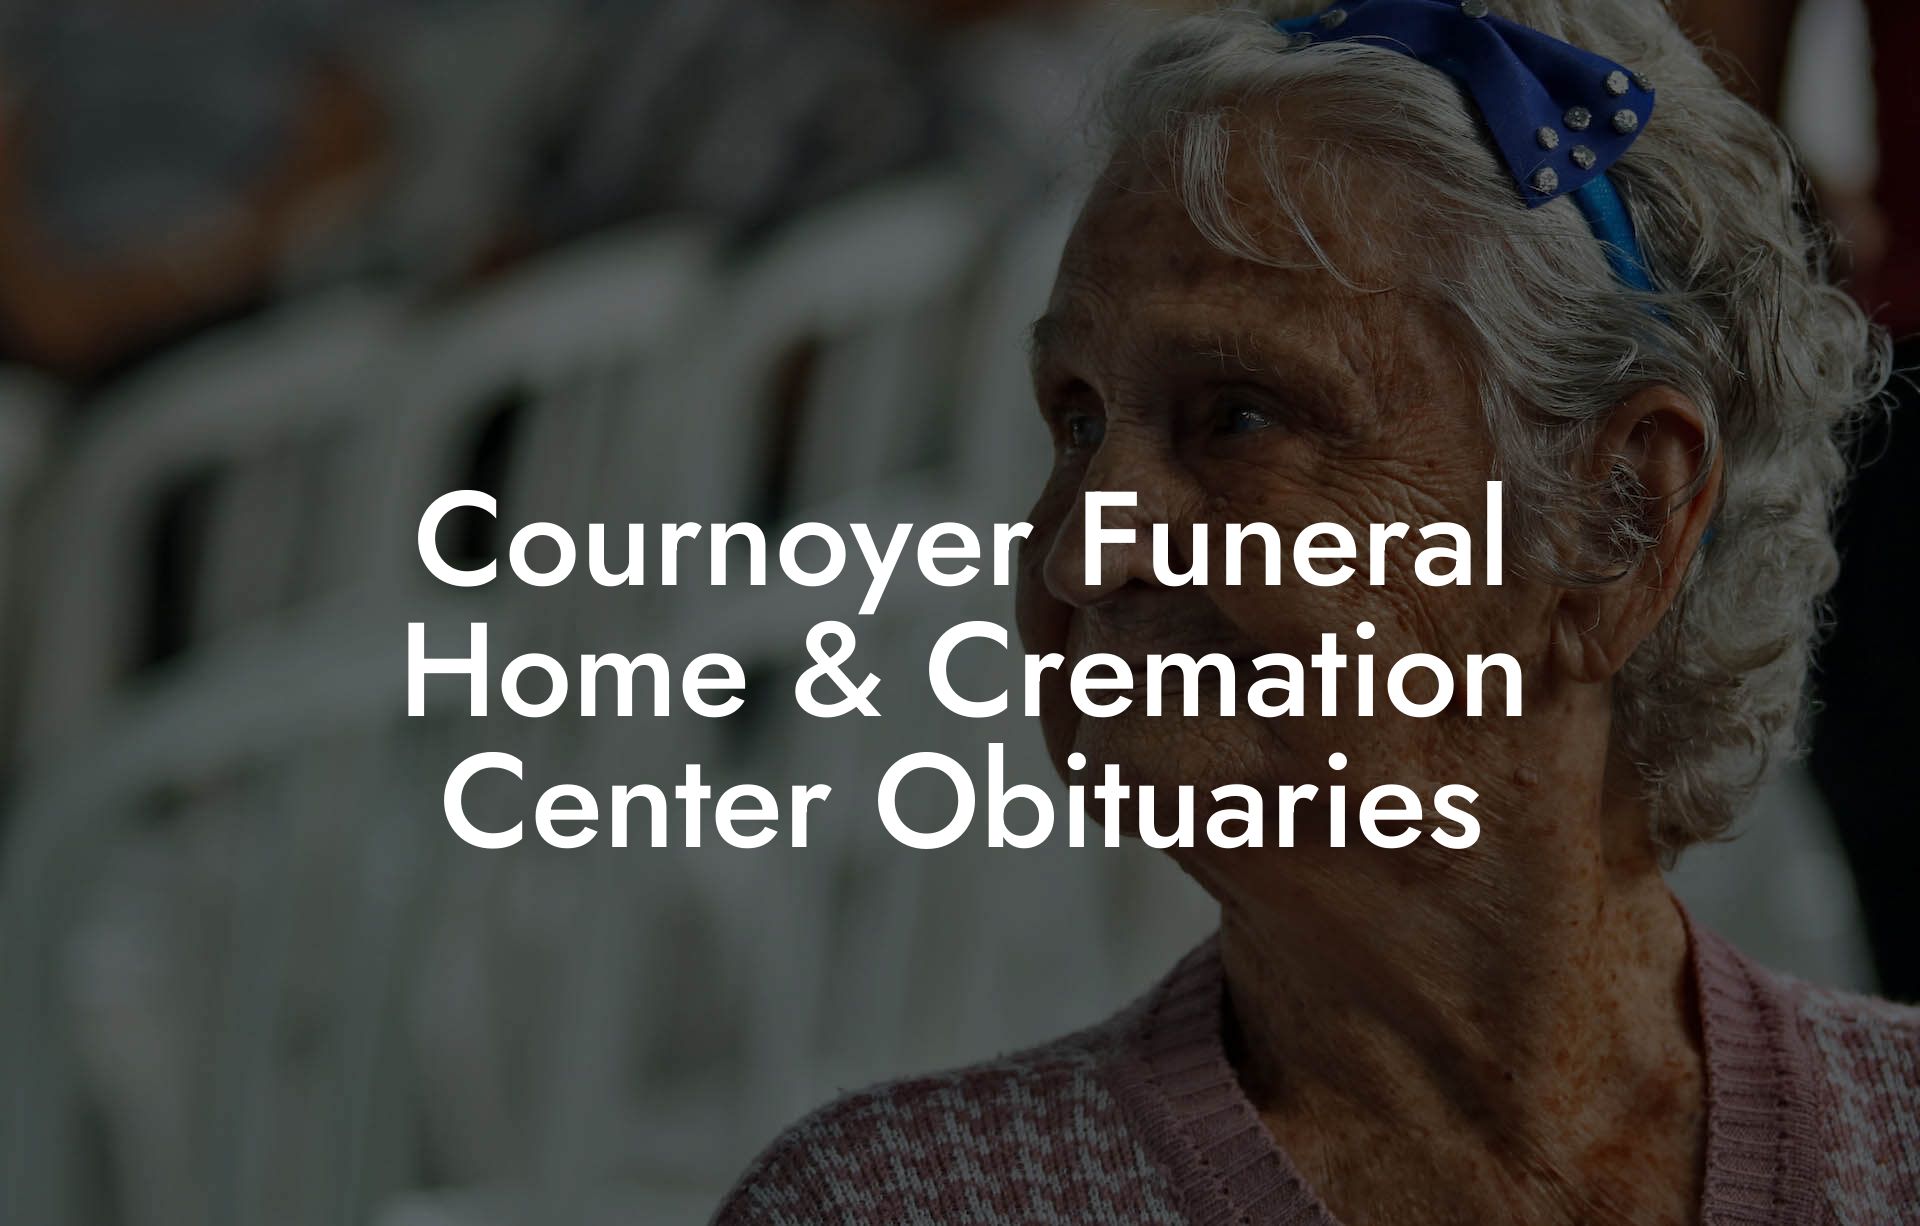 Cournoyer Funeral Home & Cremation Center Obituaries